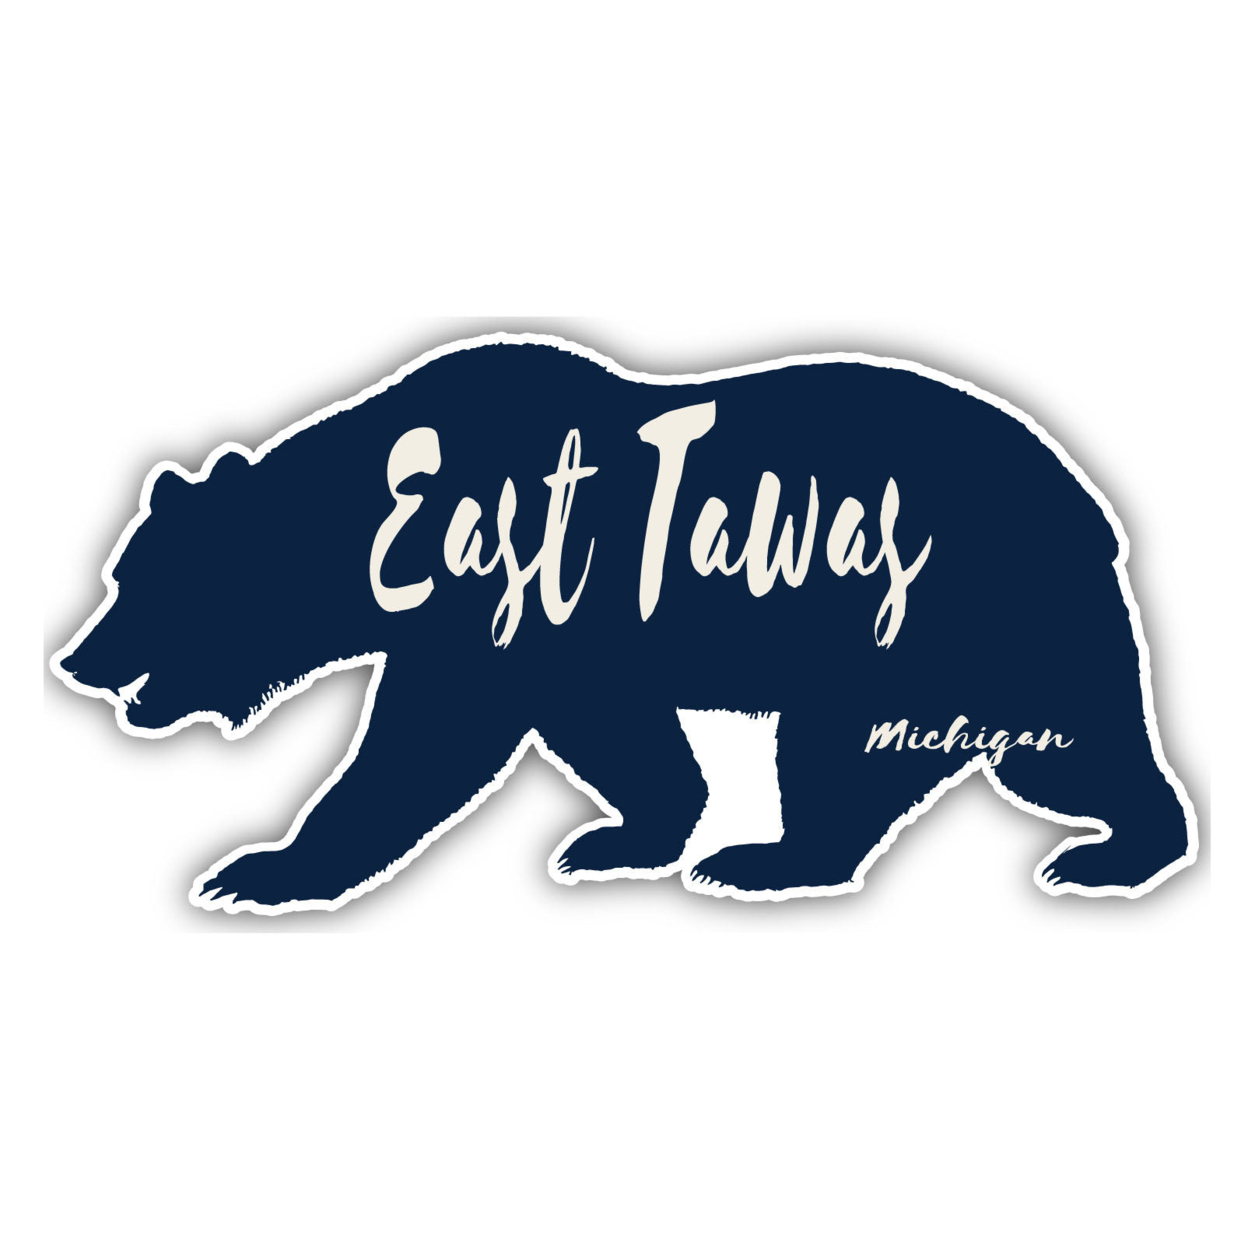 East Tawas Michigan Souvenir Decorative Stickers (Choose Theme And Size) - 4-Pack, 8-Inch, Bear